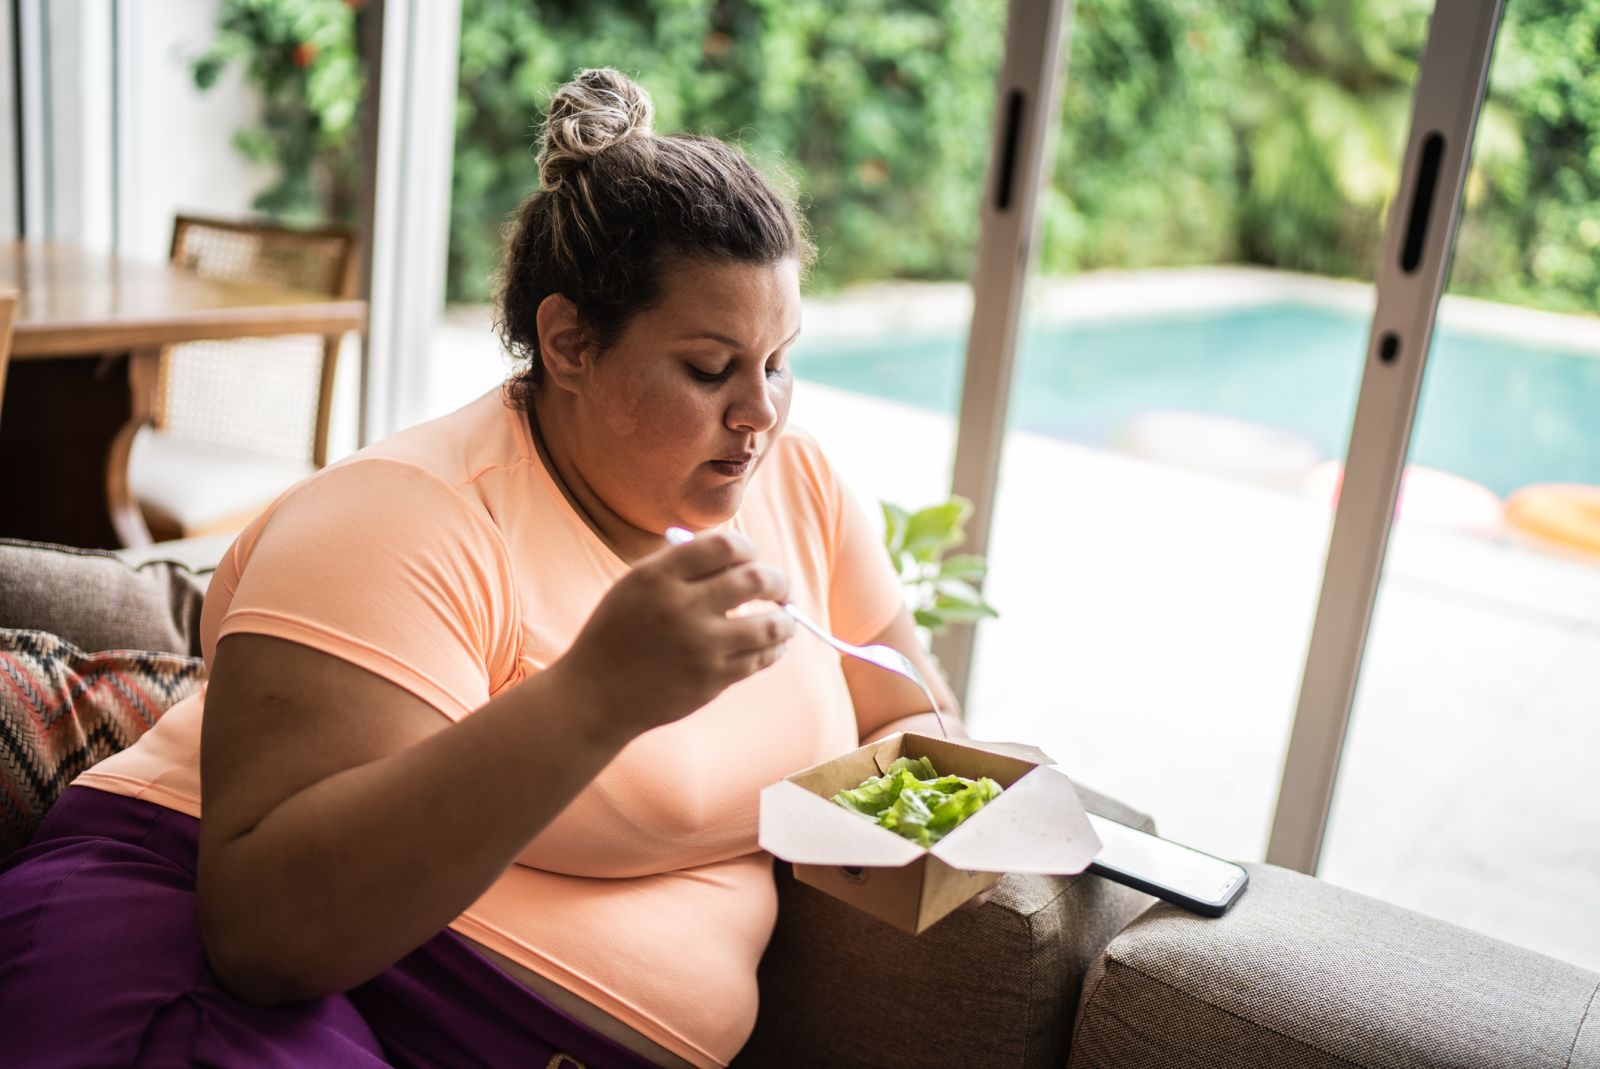 A person with obesity eating a salad